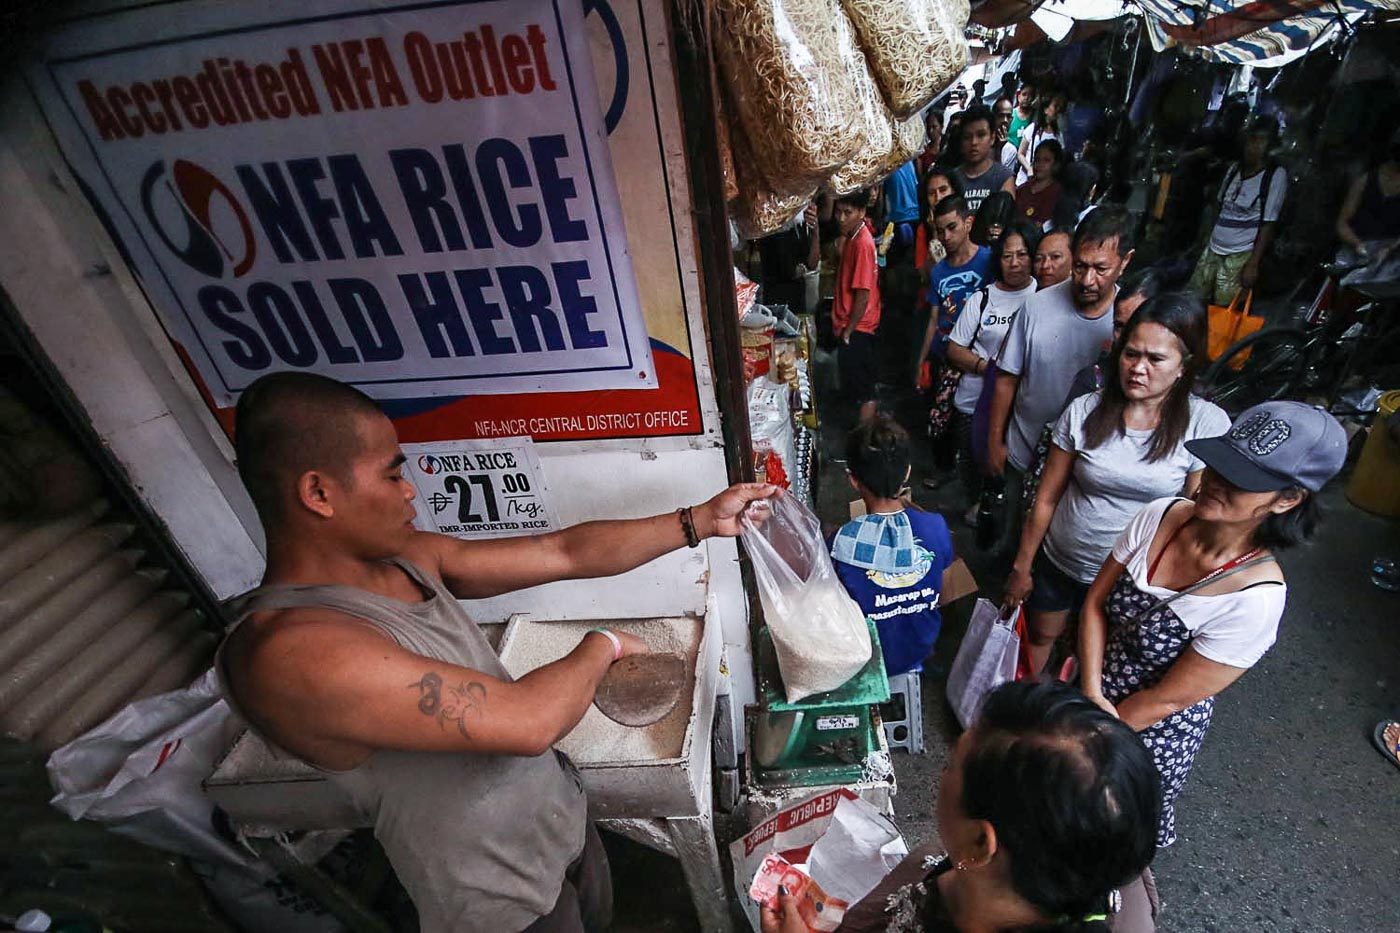 FAST FACTS Rice prices in the Philippines